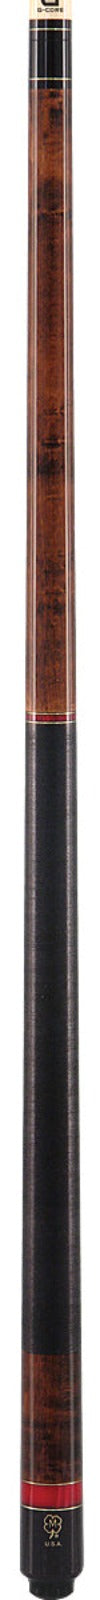 McDermott G209 with G-Core Shaft Pool Cue